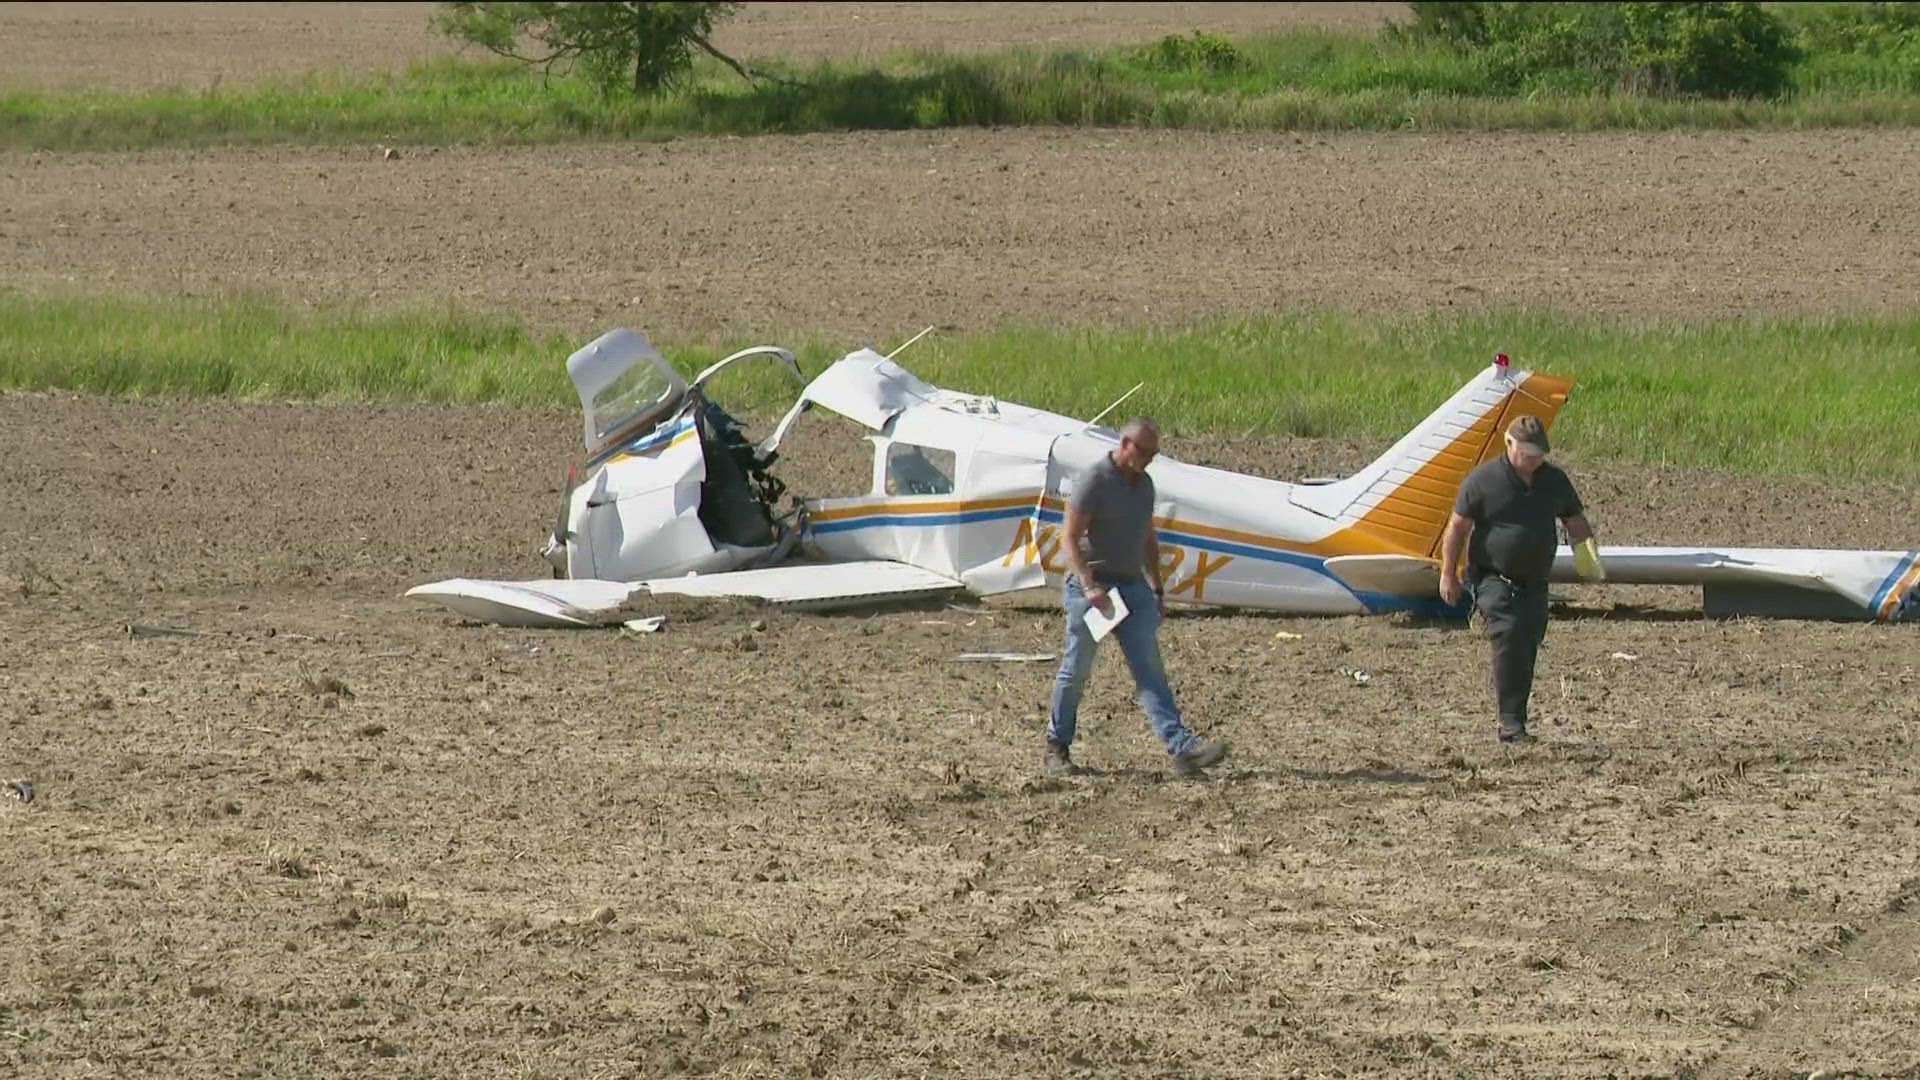 Ken Krause was working outside on his patio when he saw the plane crash into a field Monday afternoon opposite his house in Washtenaw County.